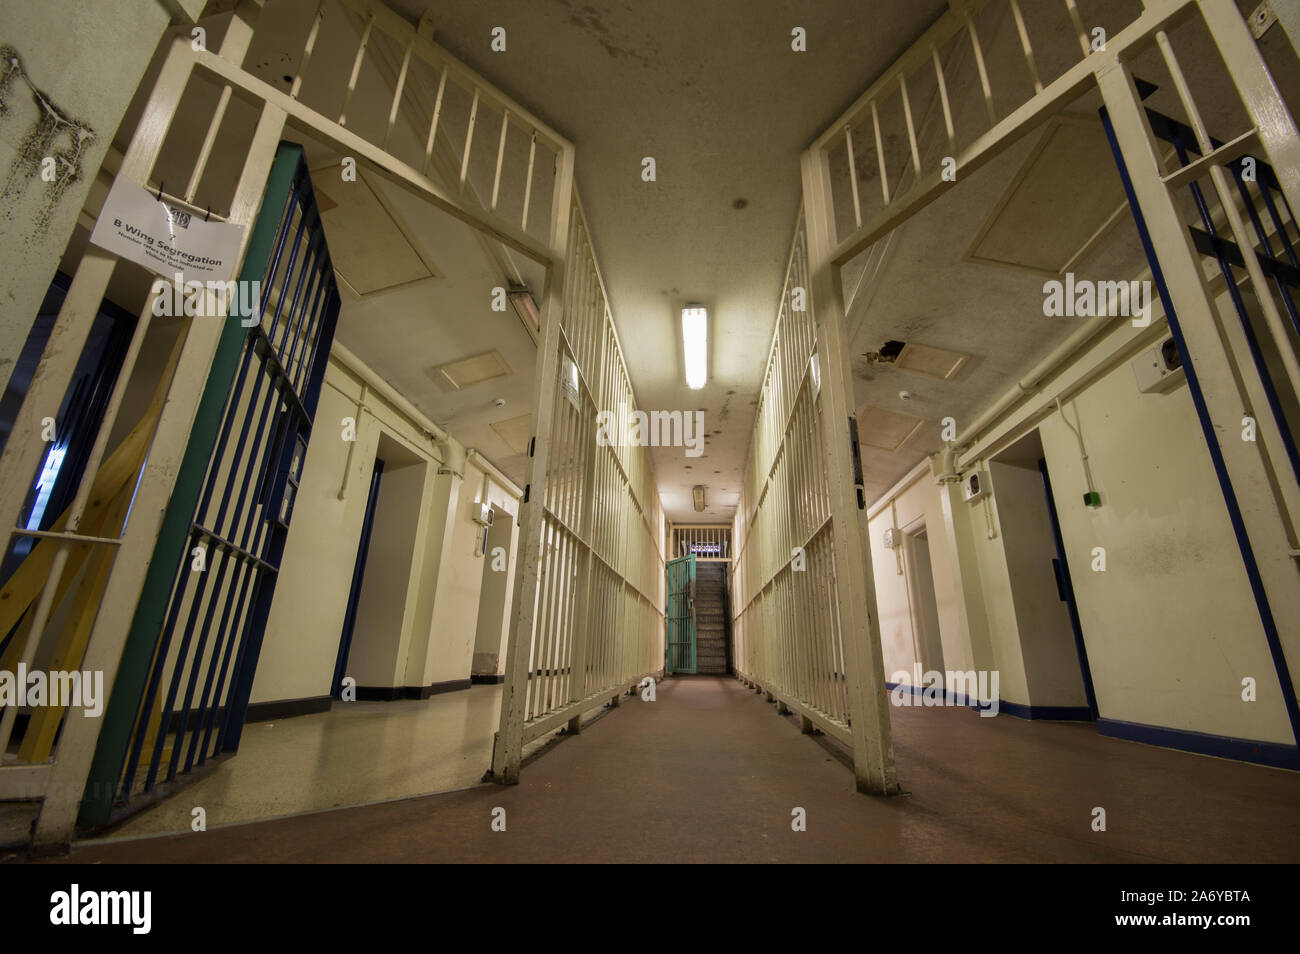 GLOUCESTER: Segregration zones. EERIE photos of the UK’s ‘most haunted’ prison where serial killer Fred West was locked up capture the facility’s dark Stock Photo